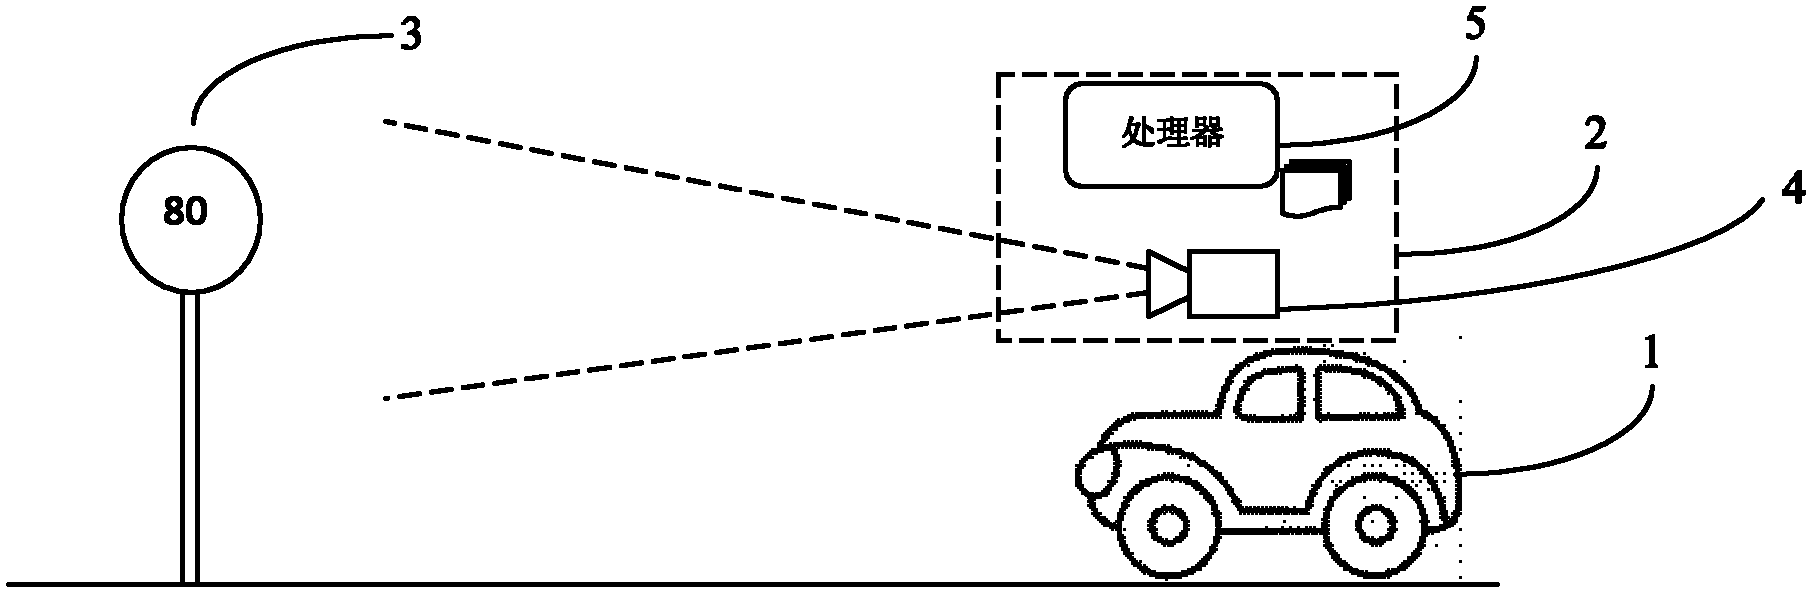 Road sign detection method and device